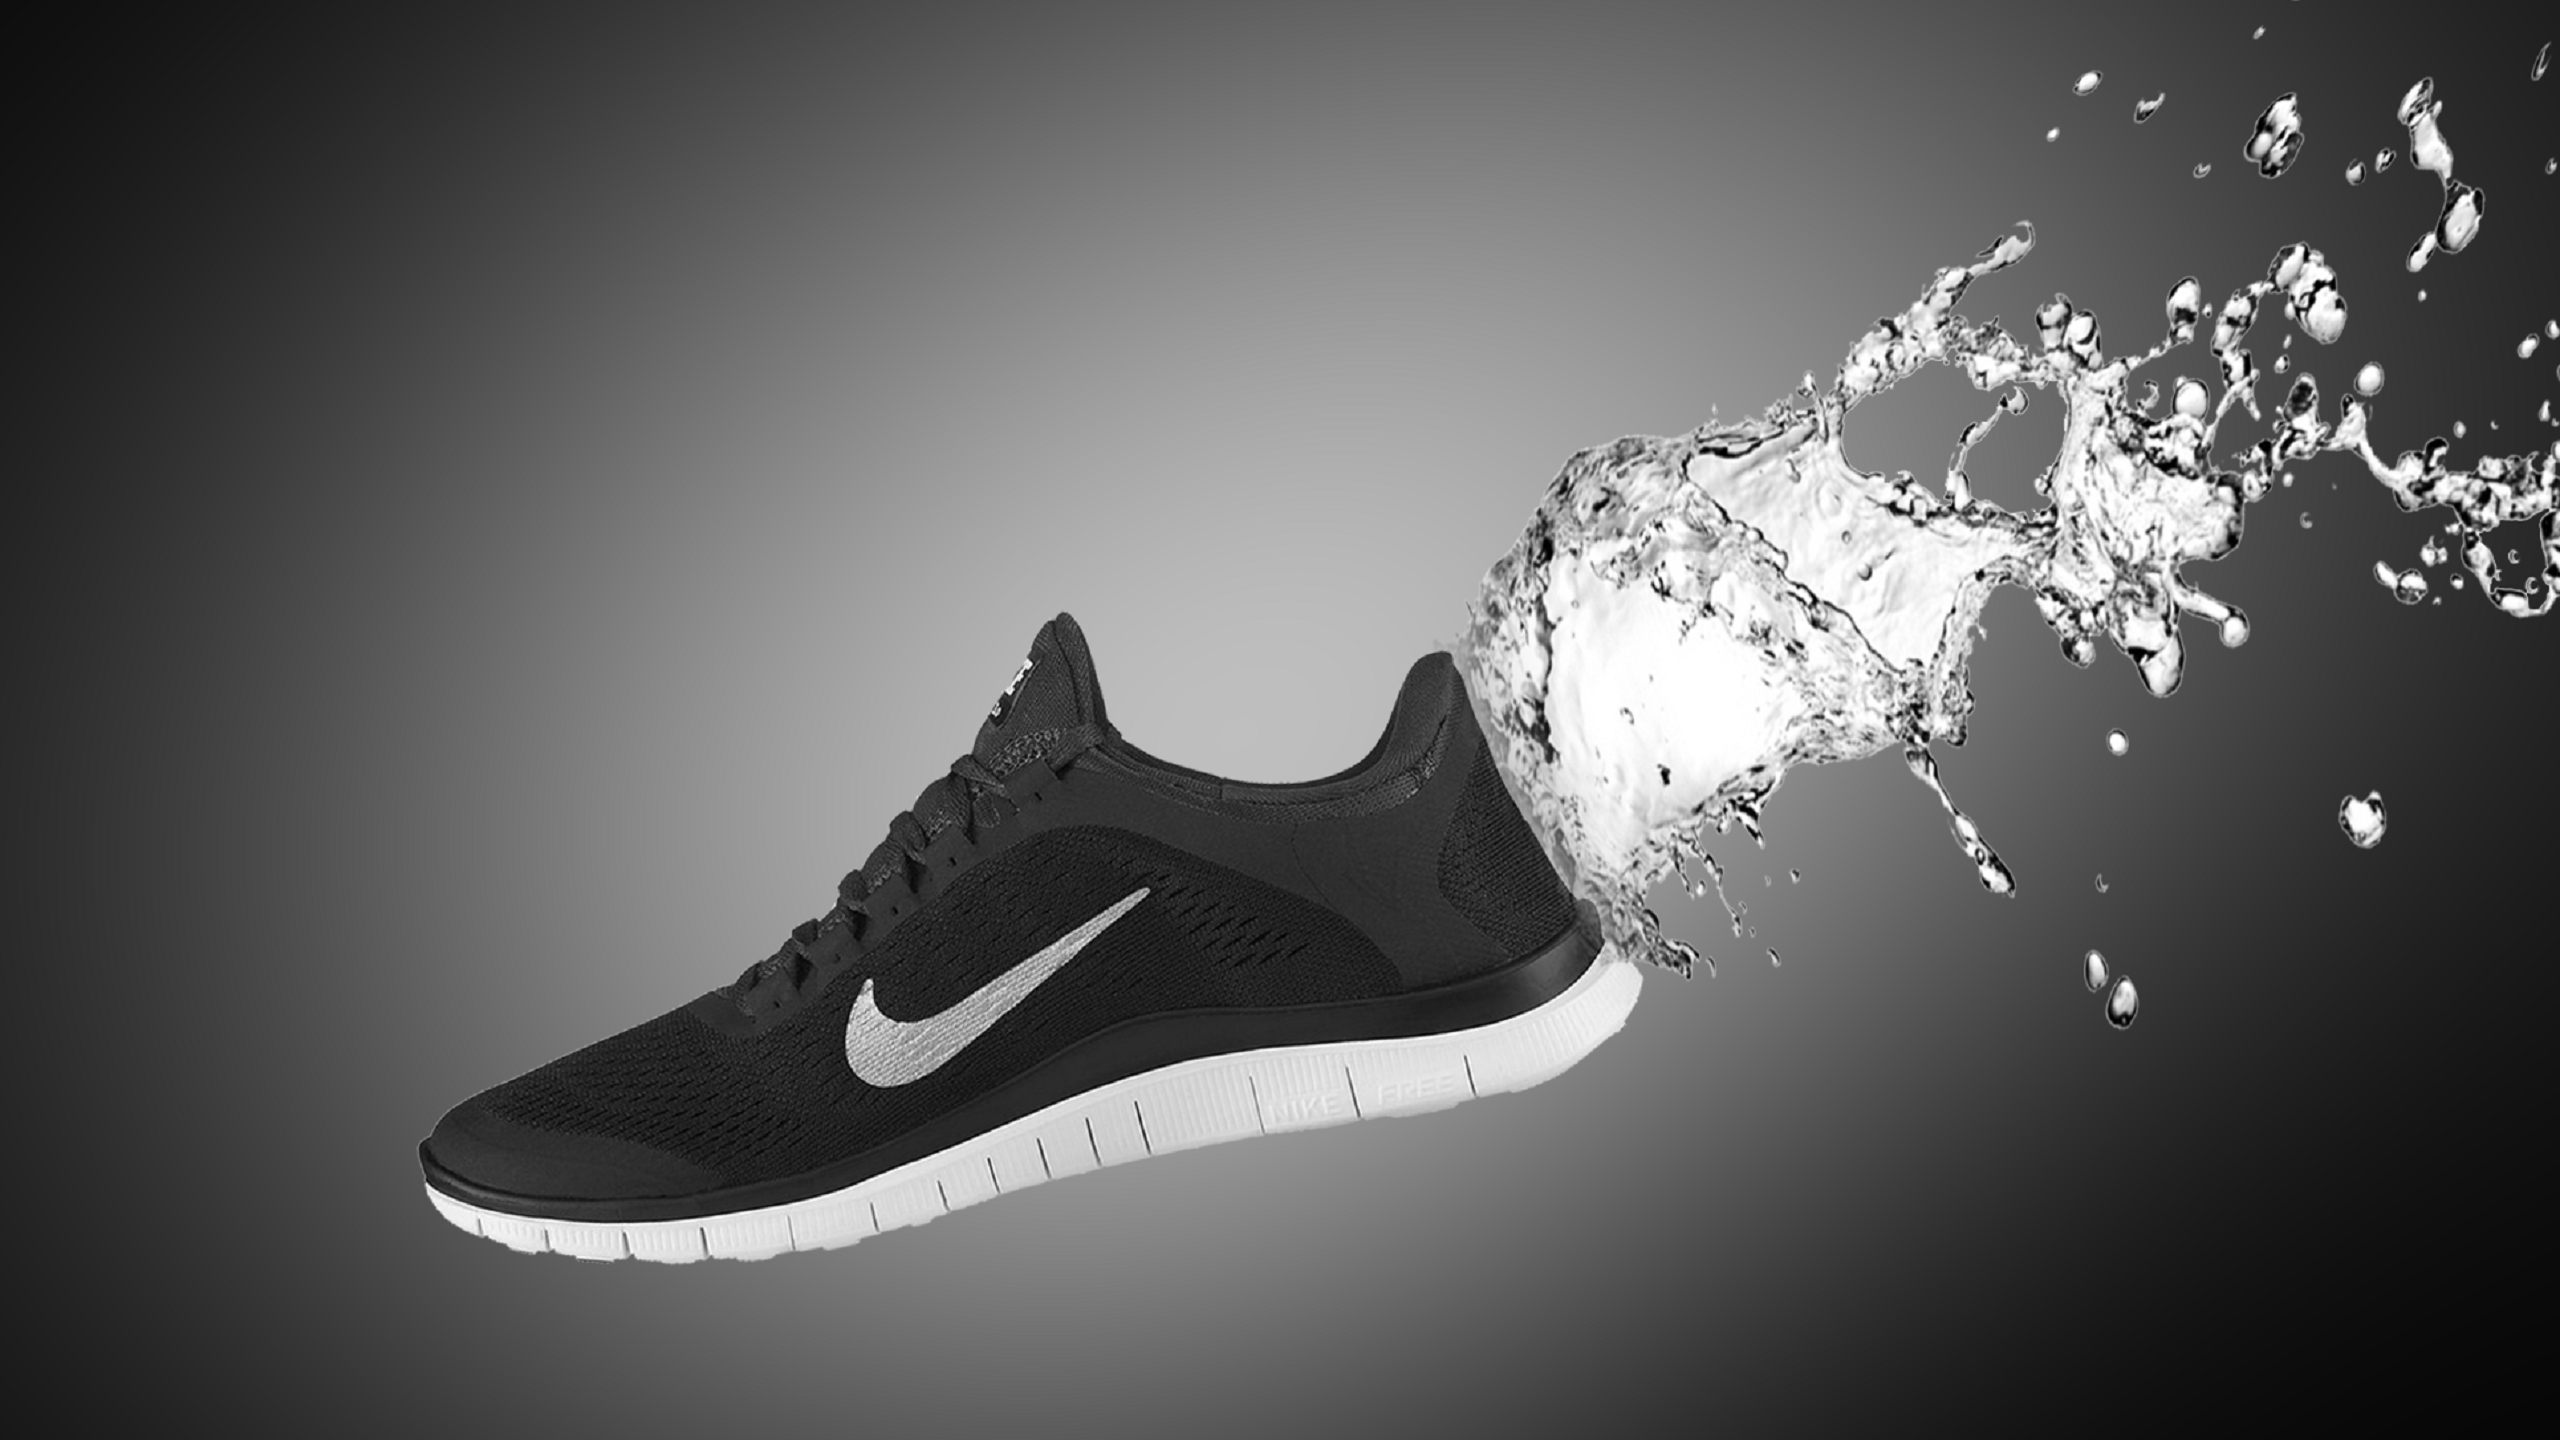 Nike Just Did It! Shoe Giant Says Will No Longer Supply to Israeli Stores